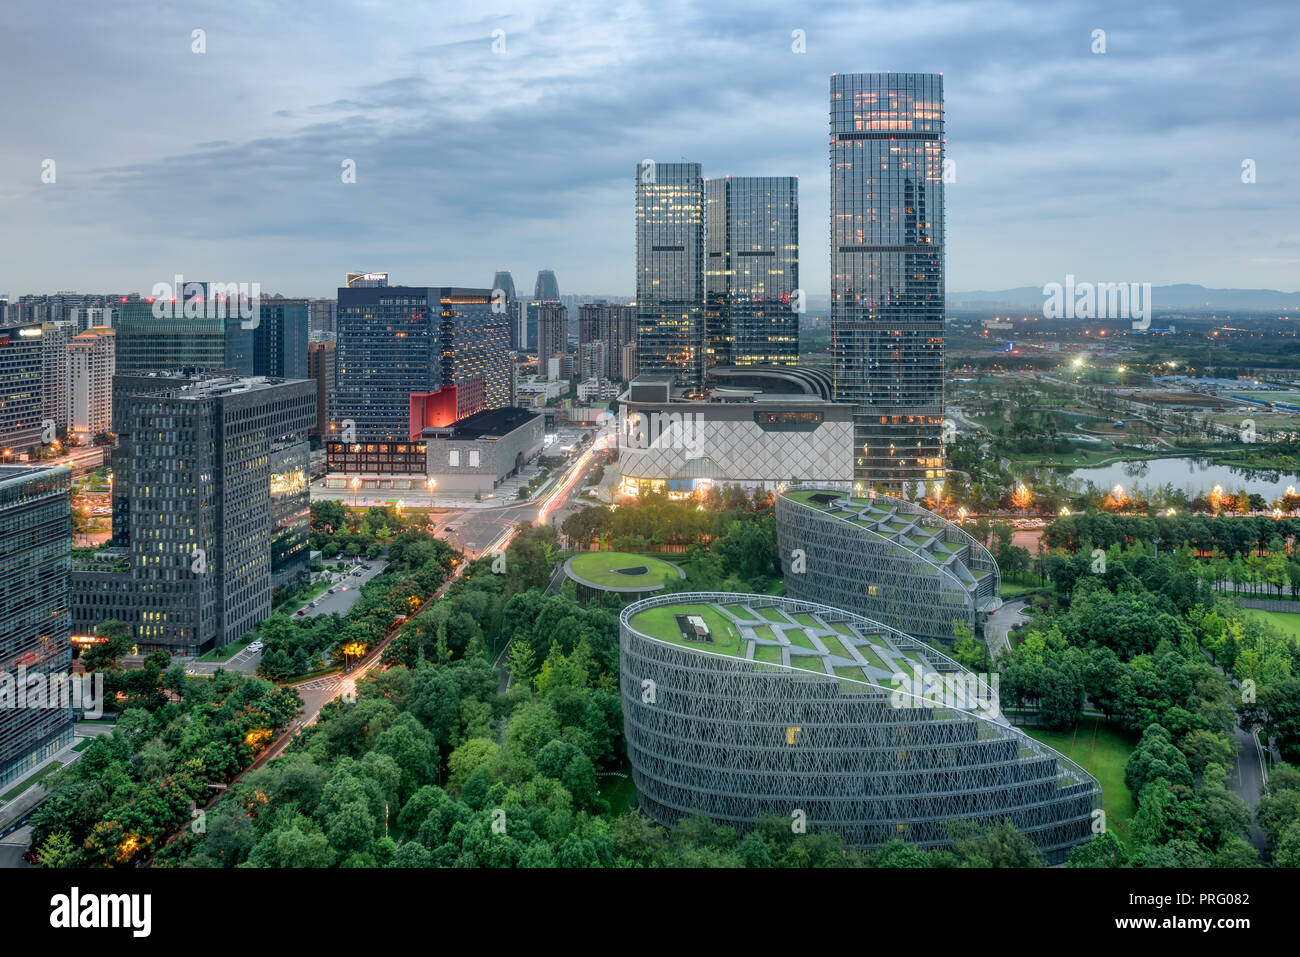 The financial city at night in Chengdu,Sichuan province ,China, which is inspired by the design of Bird Nest Stadium in Beijing. Stock Photo